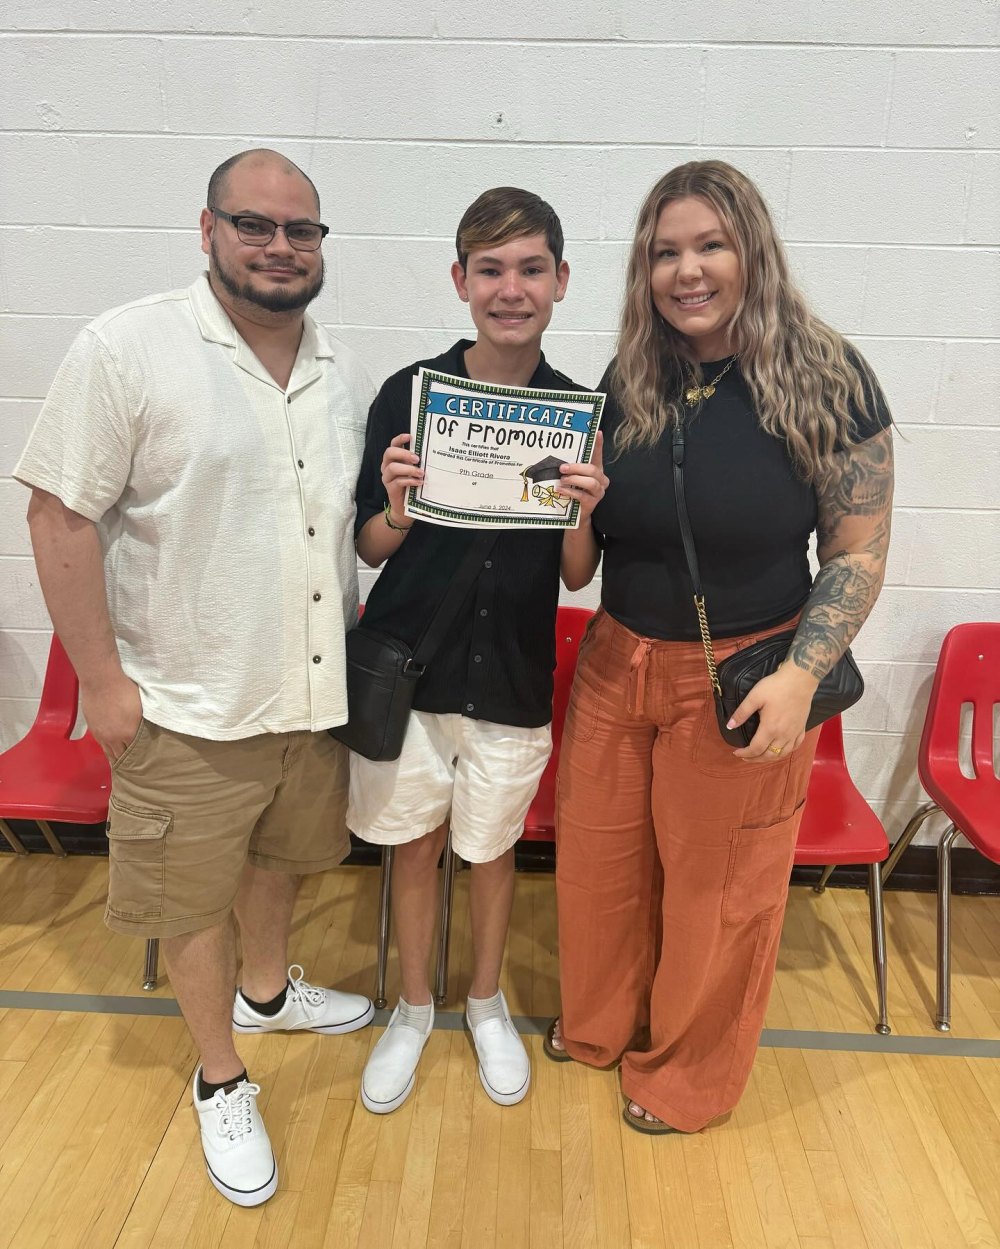 Teen Mom s Kailyn Lowry and Ex Jo Rivera Reunite to Celebrate Isaac s Middle School Graduation